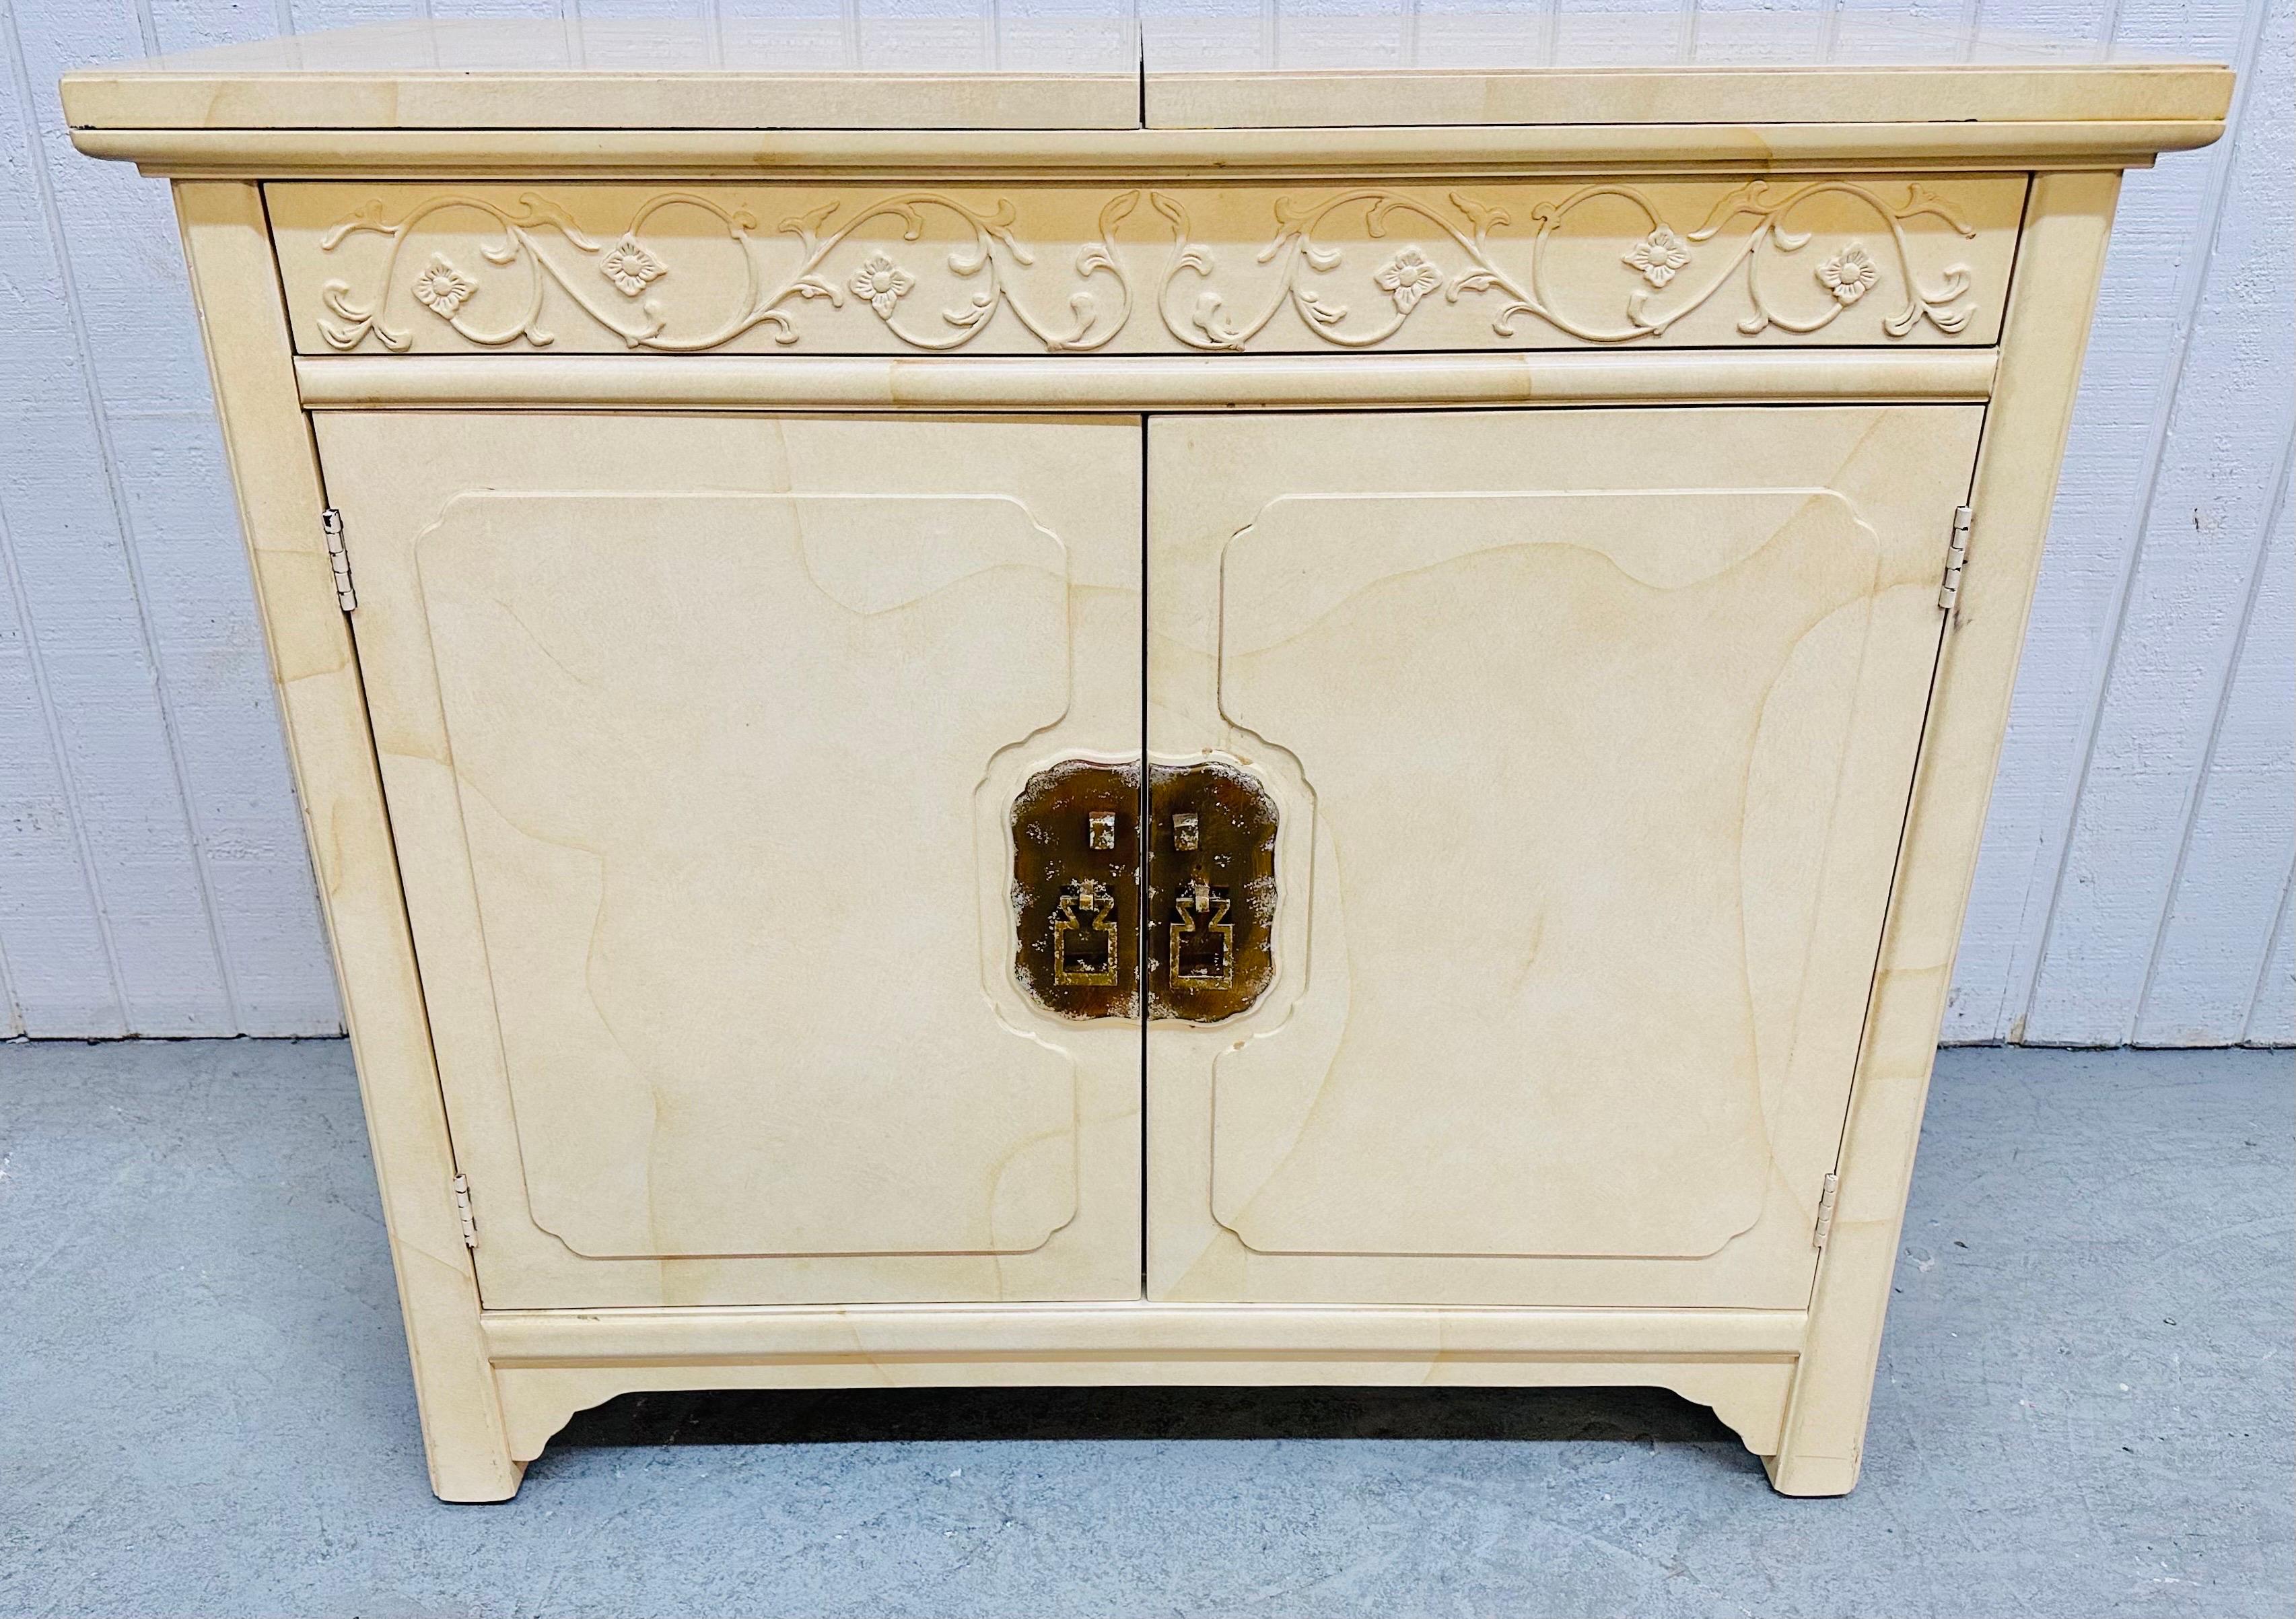 This listing is for a Vintage Henredon “Plan 2” Lacquered Bar Cabinet. Featuring a flip-top 76” L serving area, hidden push-to-open drawer, two doors that open up to storage space, original brass hardware, oriental inspired design, and a beautiful